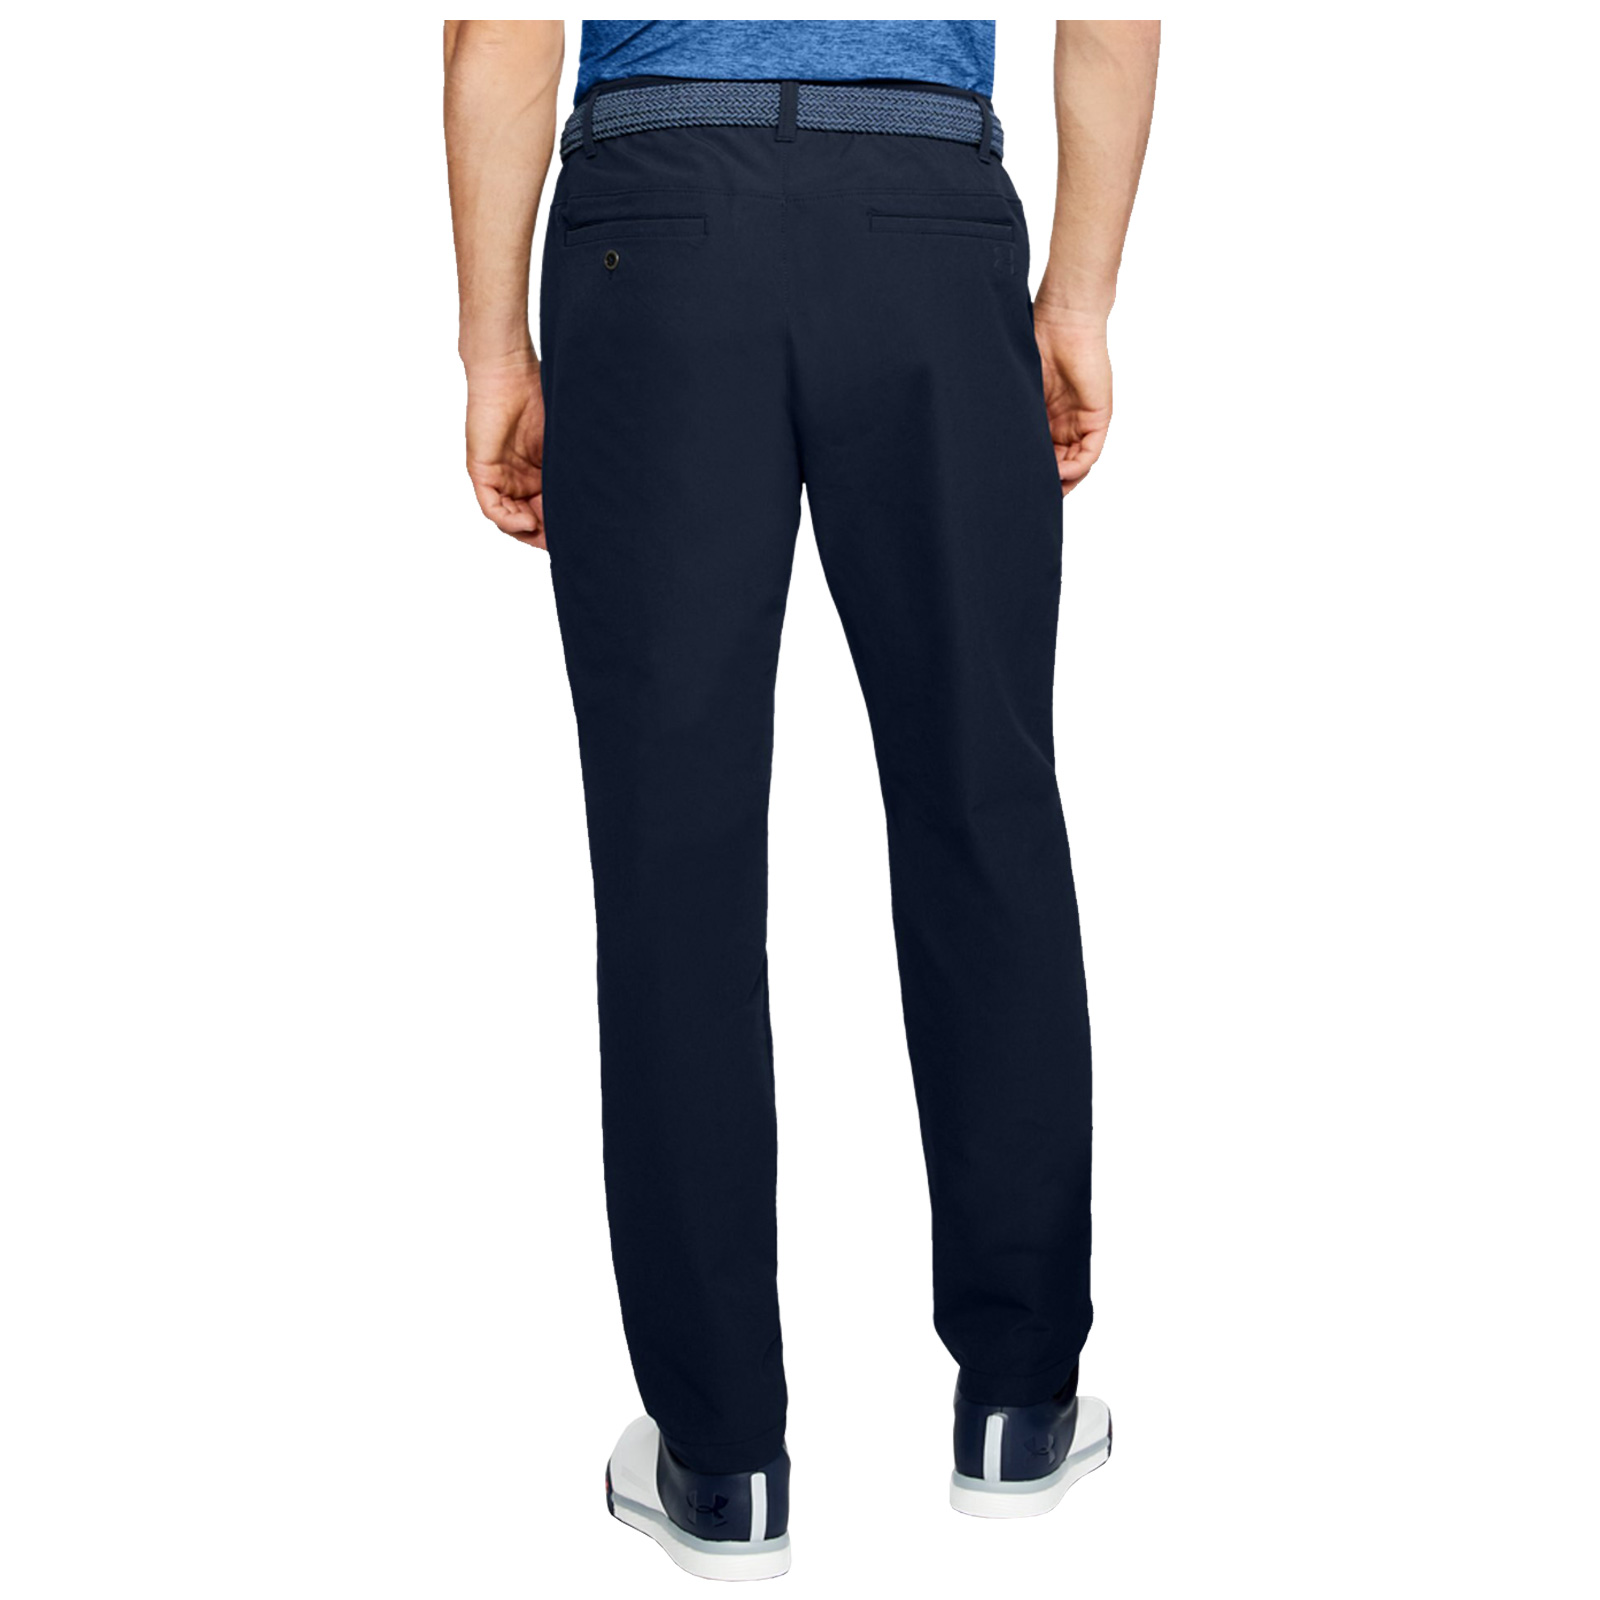 2020 Under Armour Mens ColdGear Infrared CGI Tapered Trousers UA Golf ...